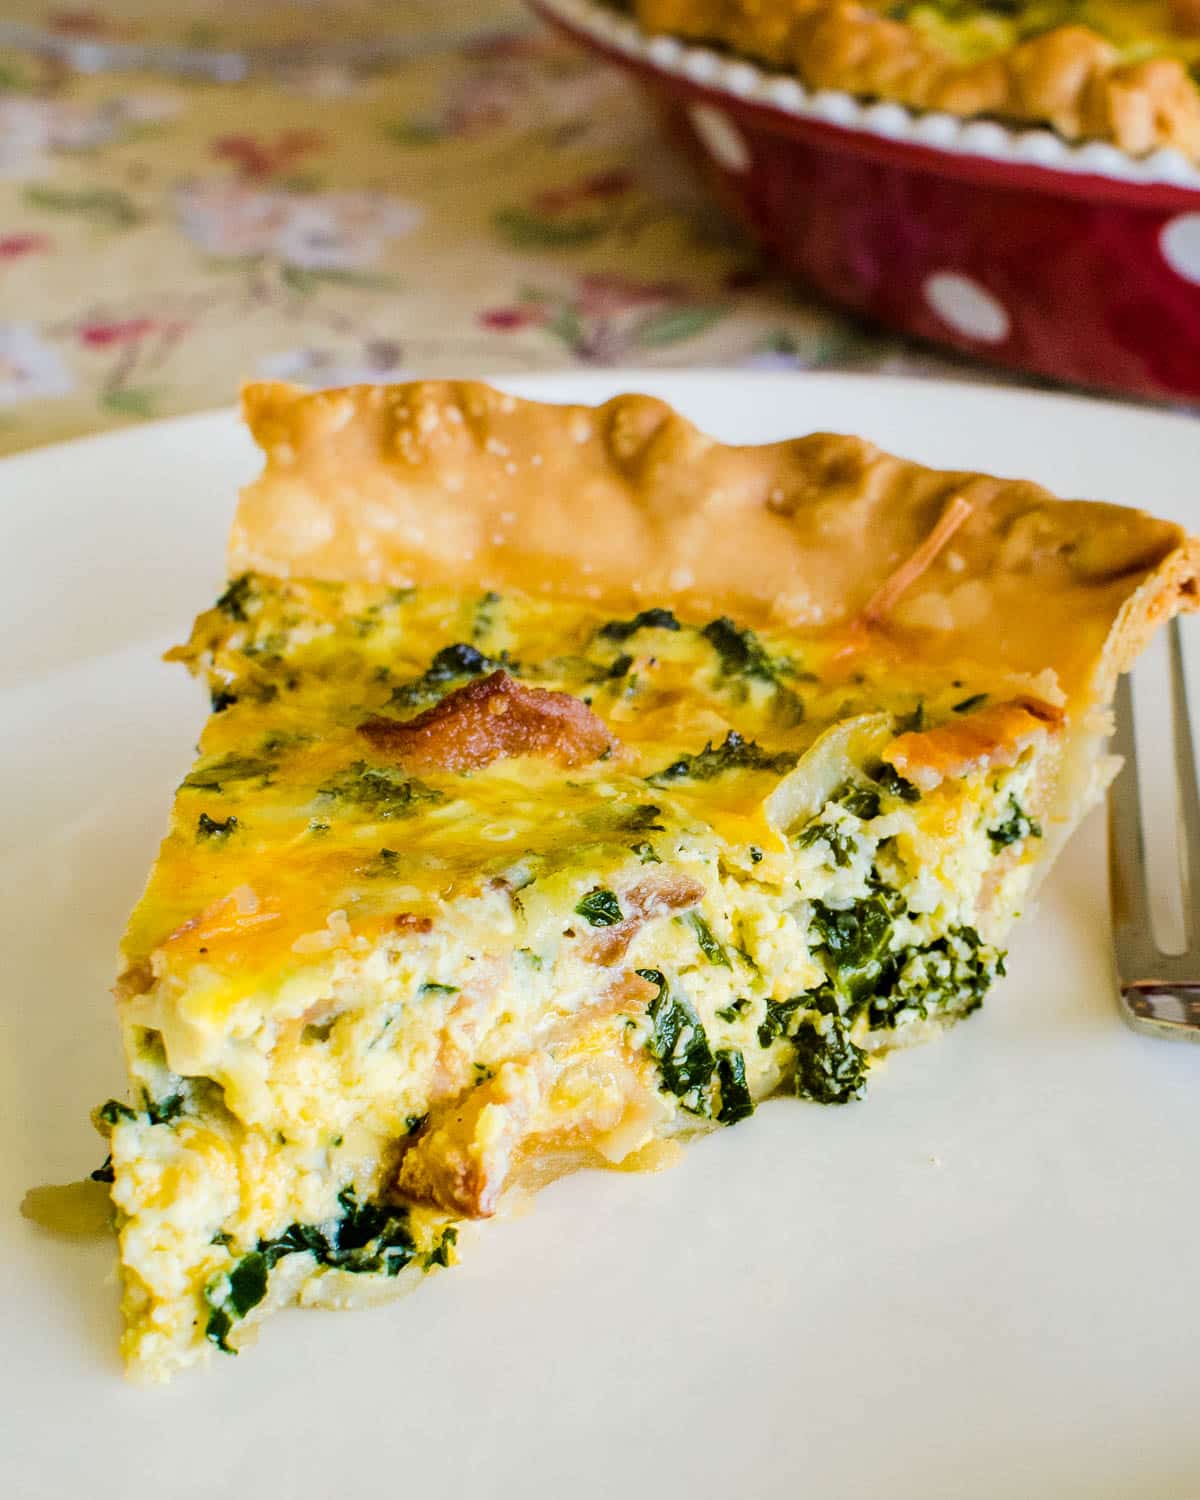 A slice of the bacon cheddar quiche with kale.